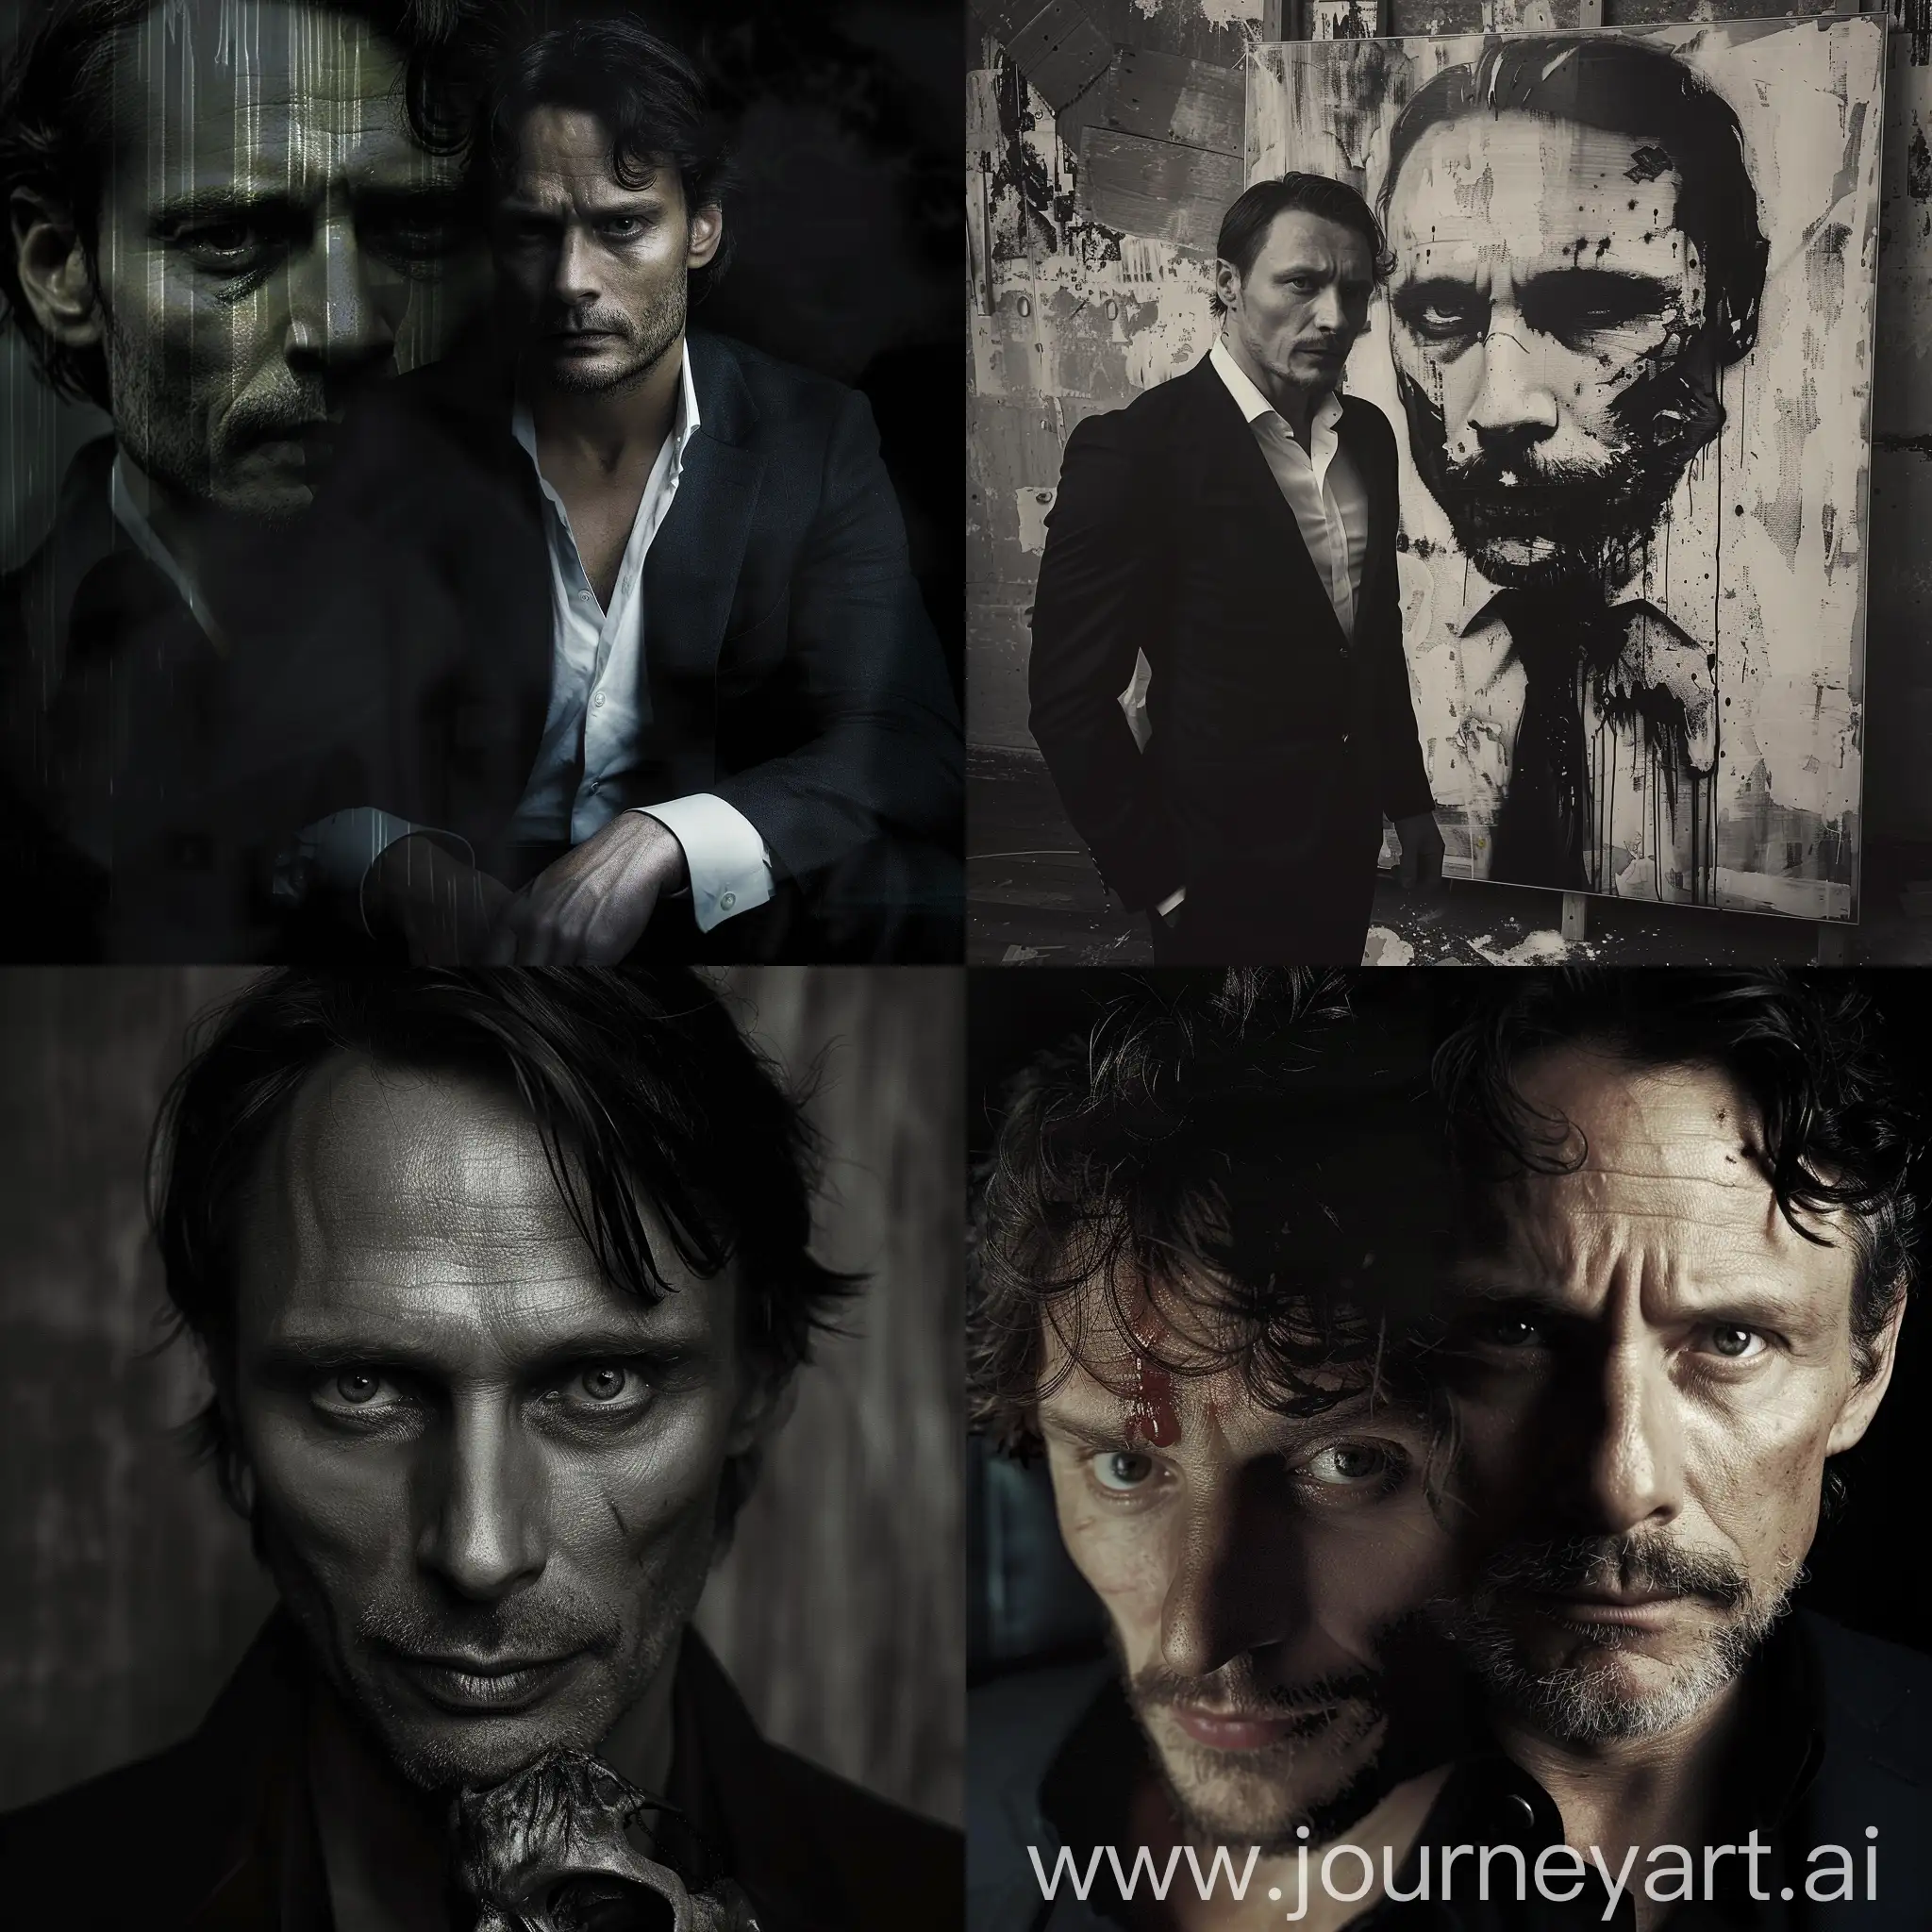 Artist-and-Hannibal-Lecter-Portrait-Creative-Collaboration